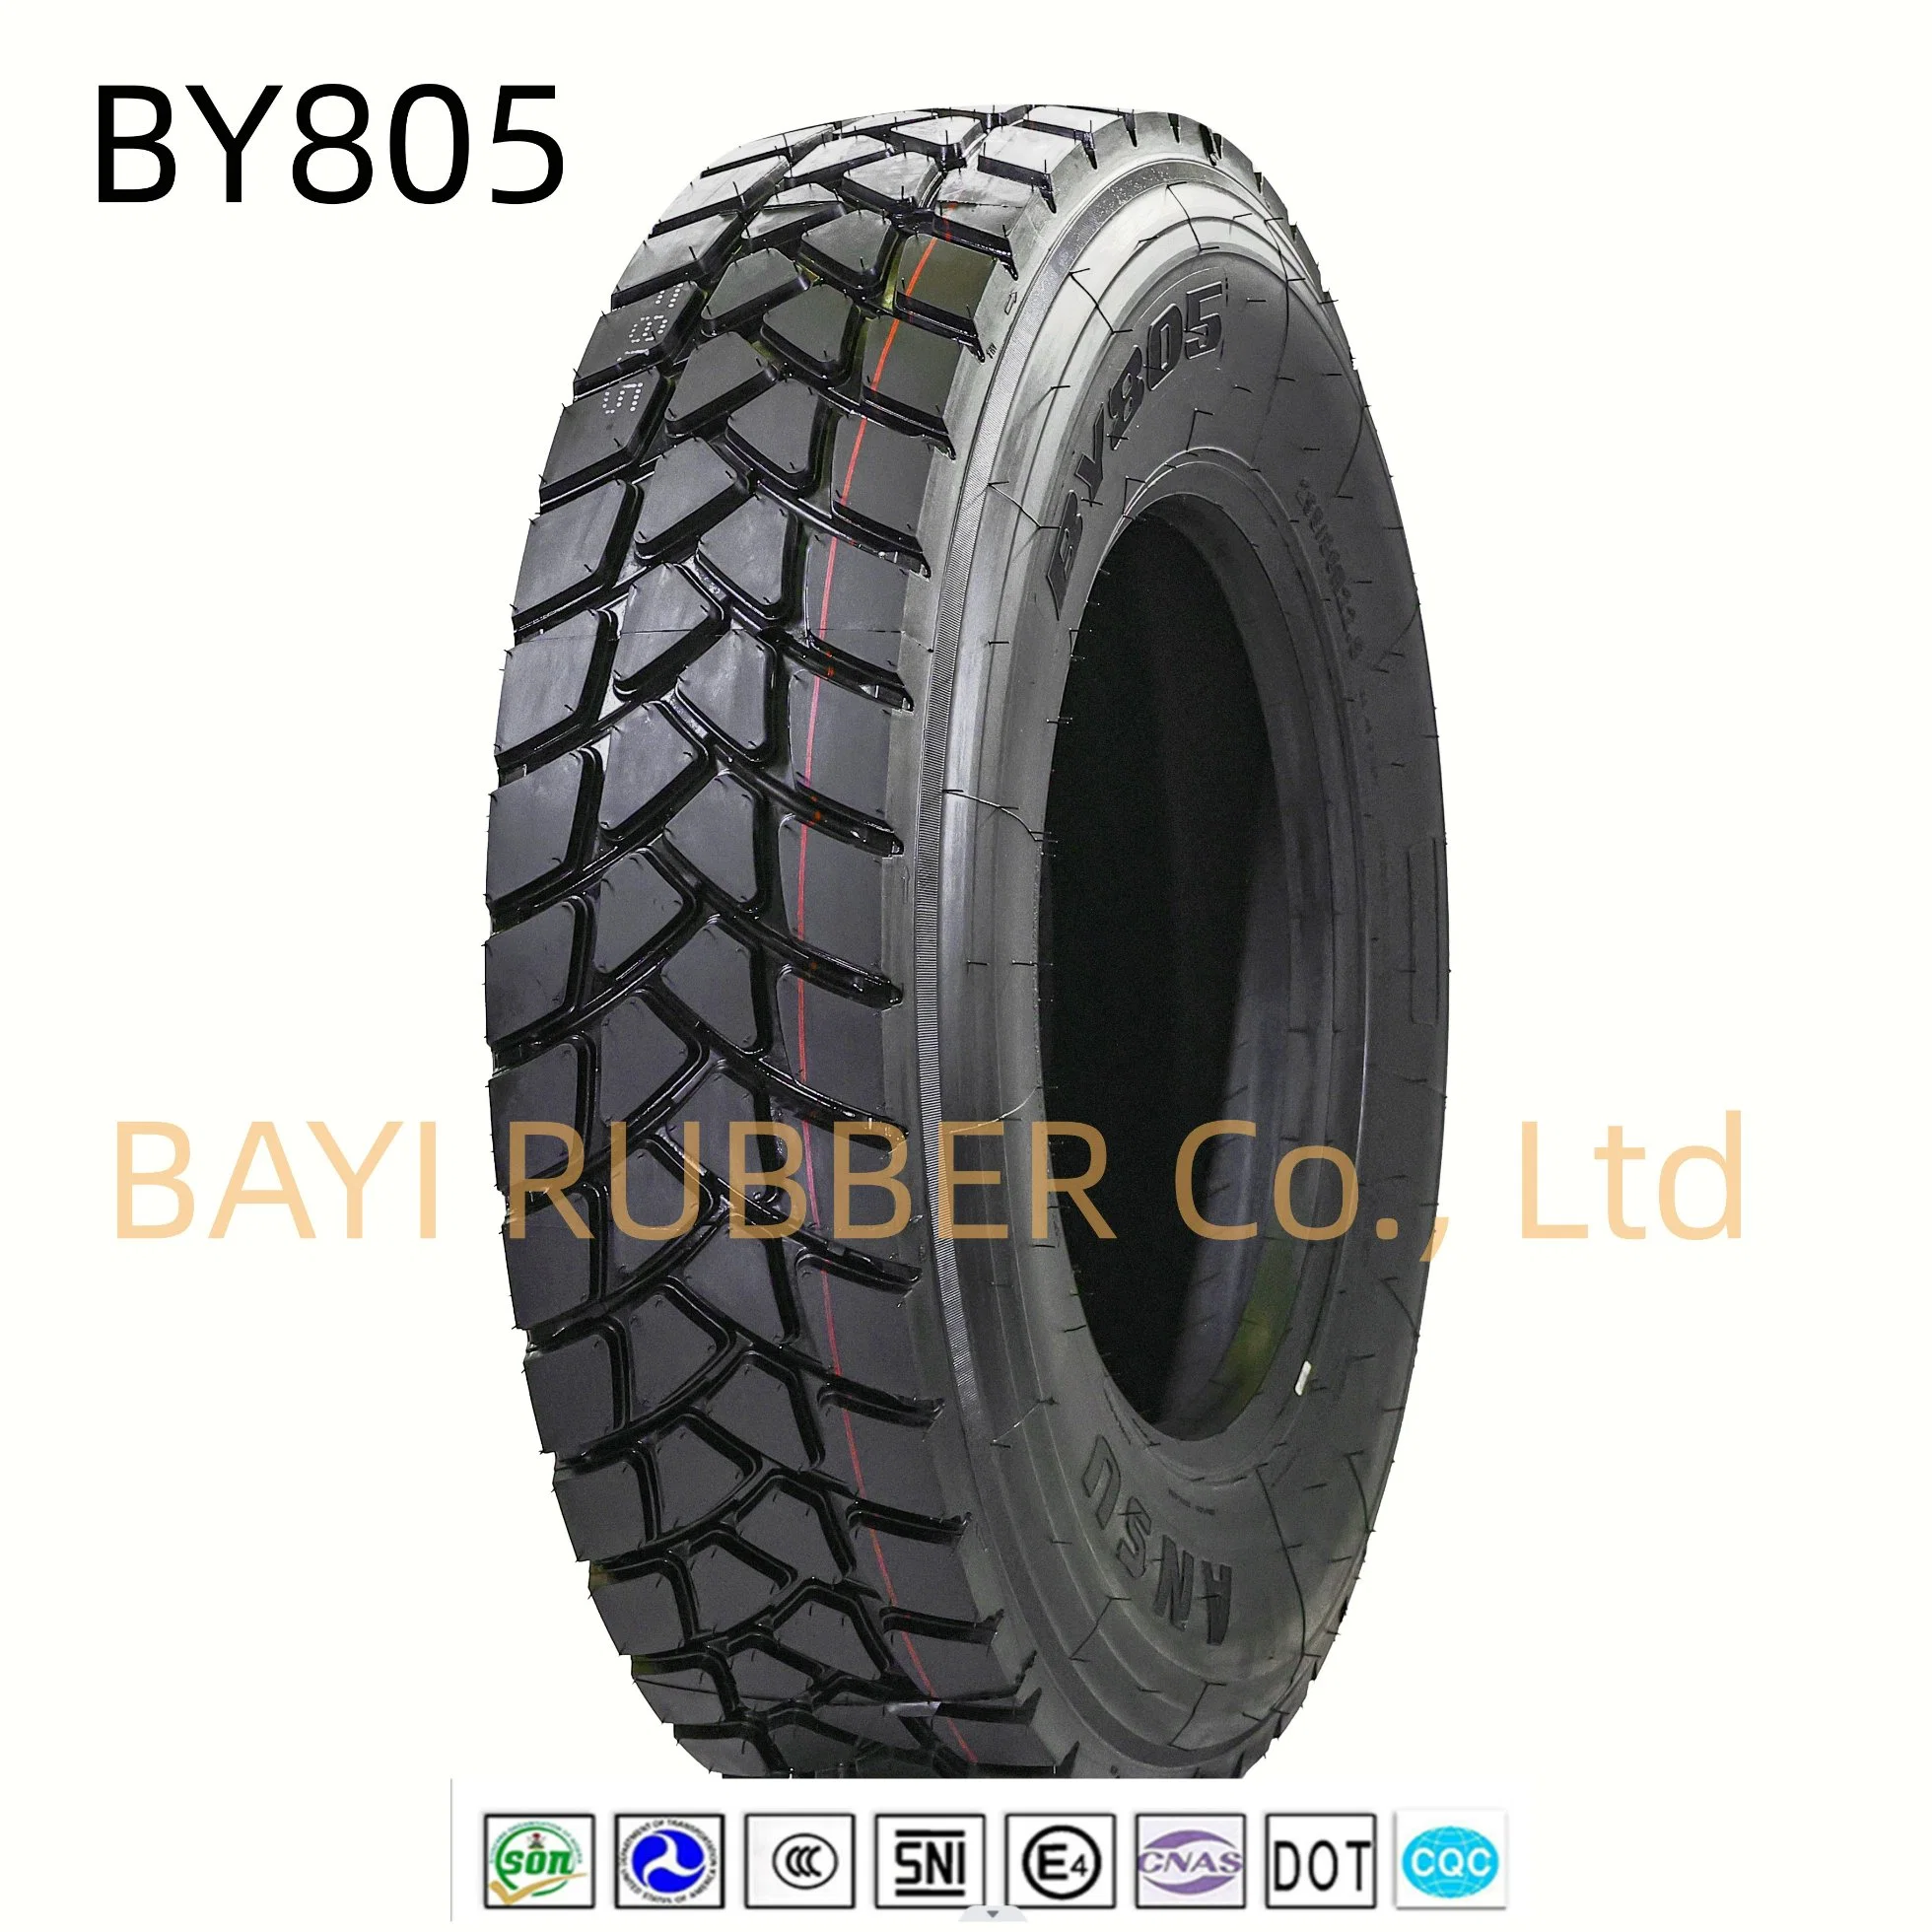 Bayi Factory, 295/80r22.5, By805, TBR, Radial Tyre, Bus/Truck Tire